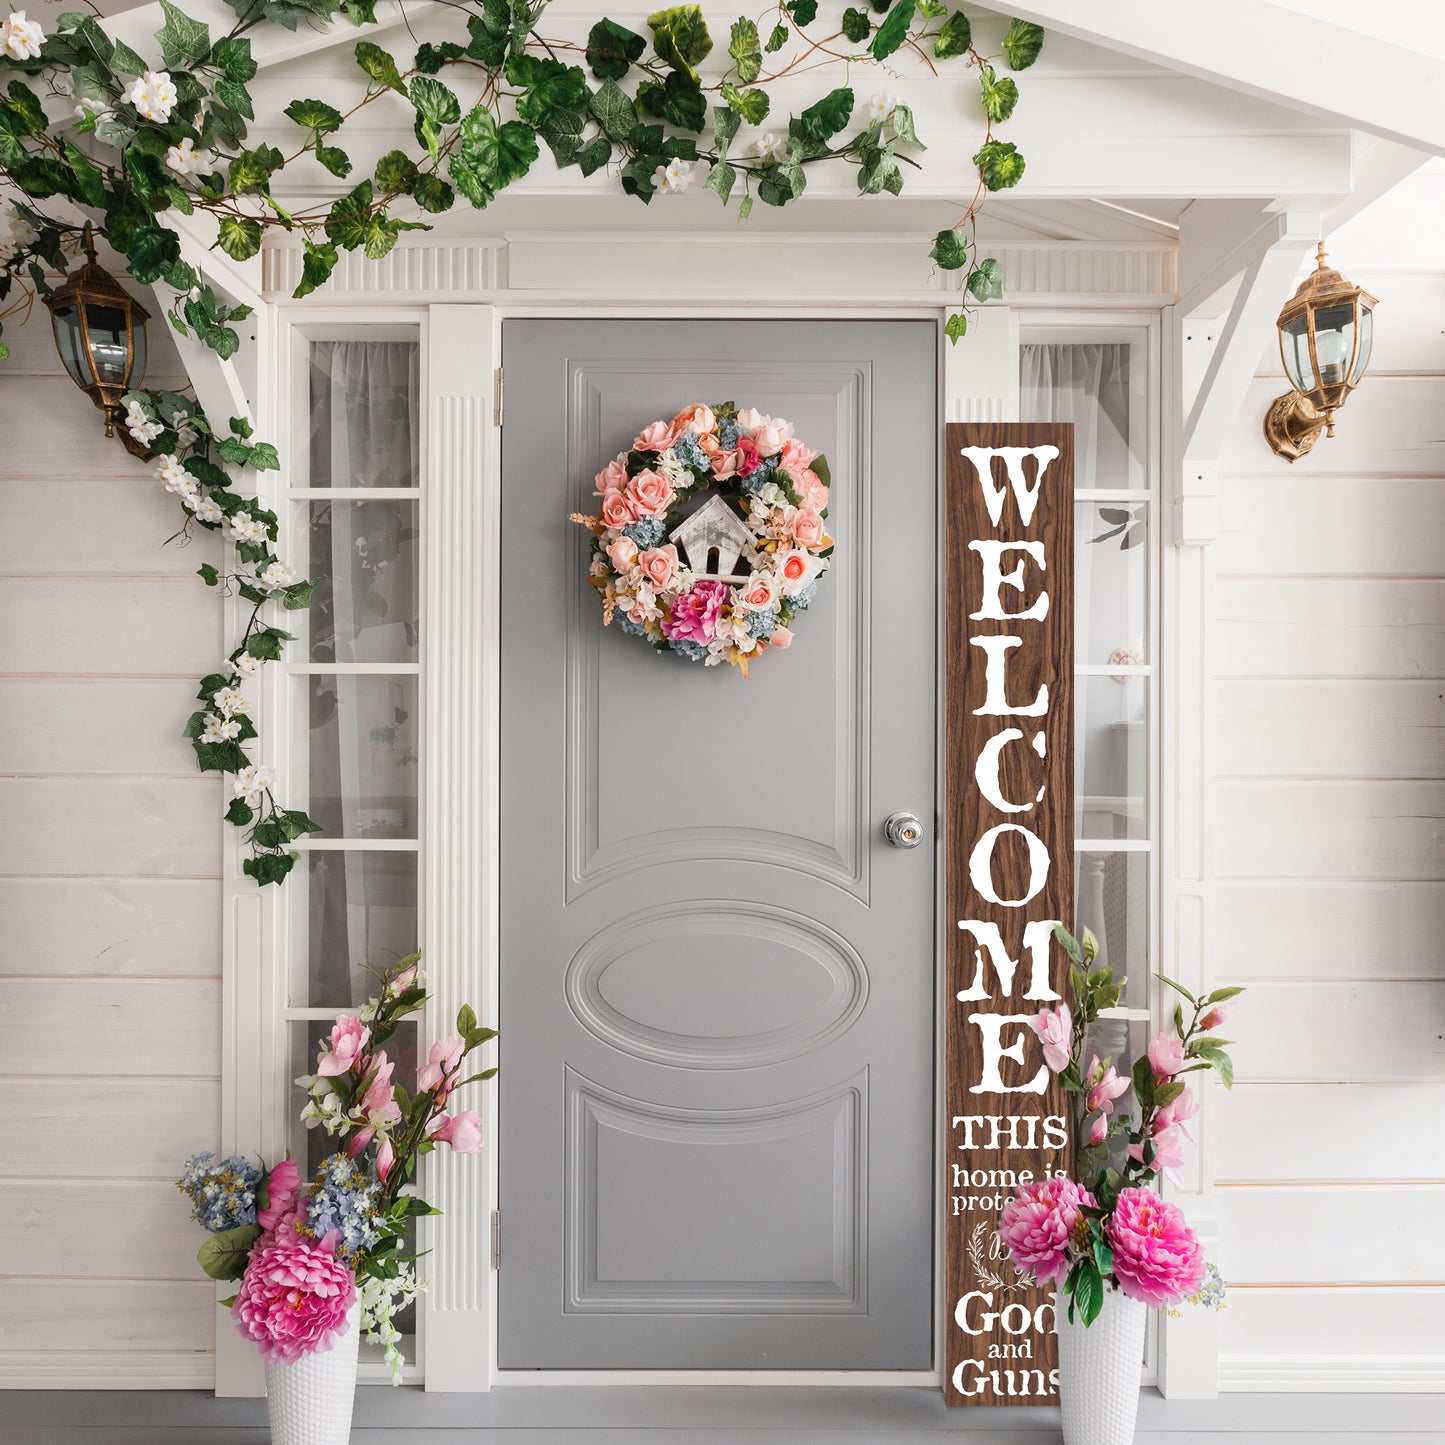 72in 'This Home is Protected by God and Guns' |  Foldable Wooden Front Door & Porch Sign | Bold Home Security Statement | Brown